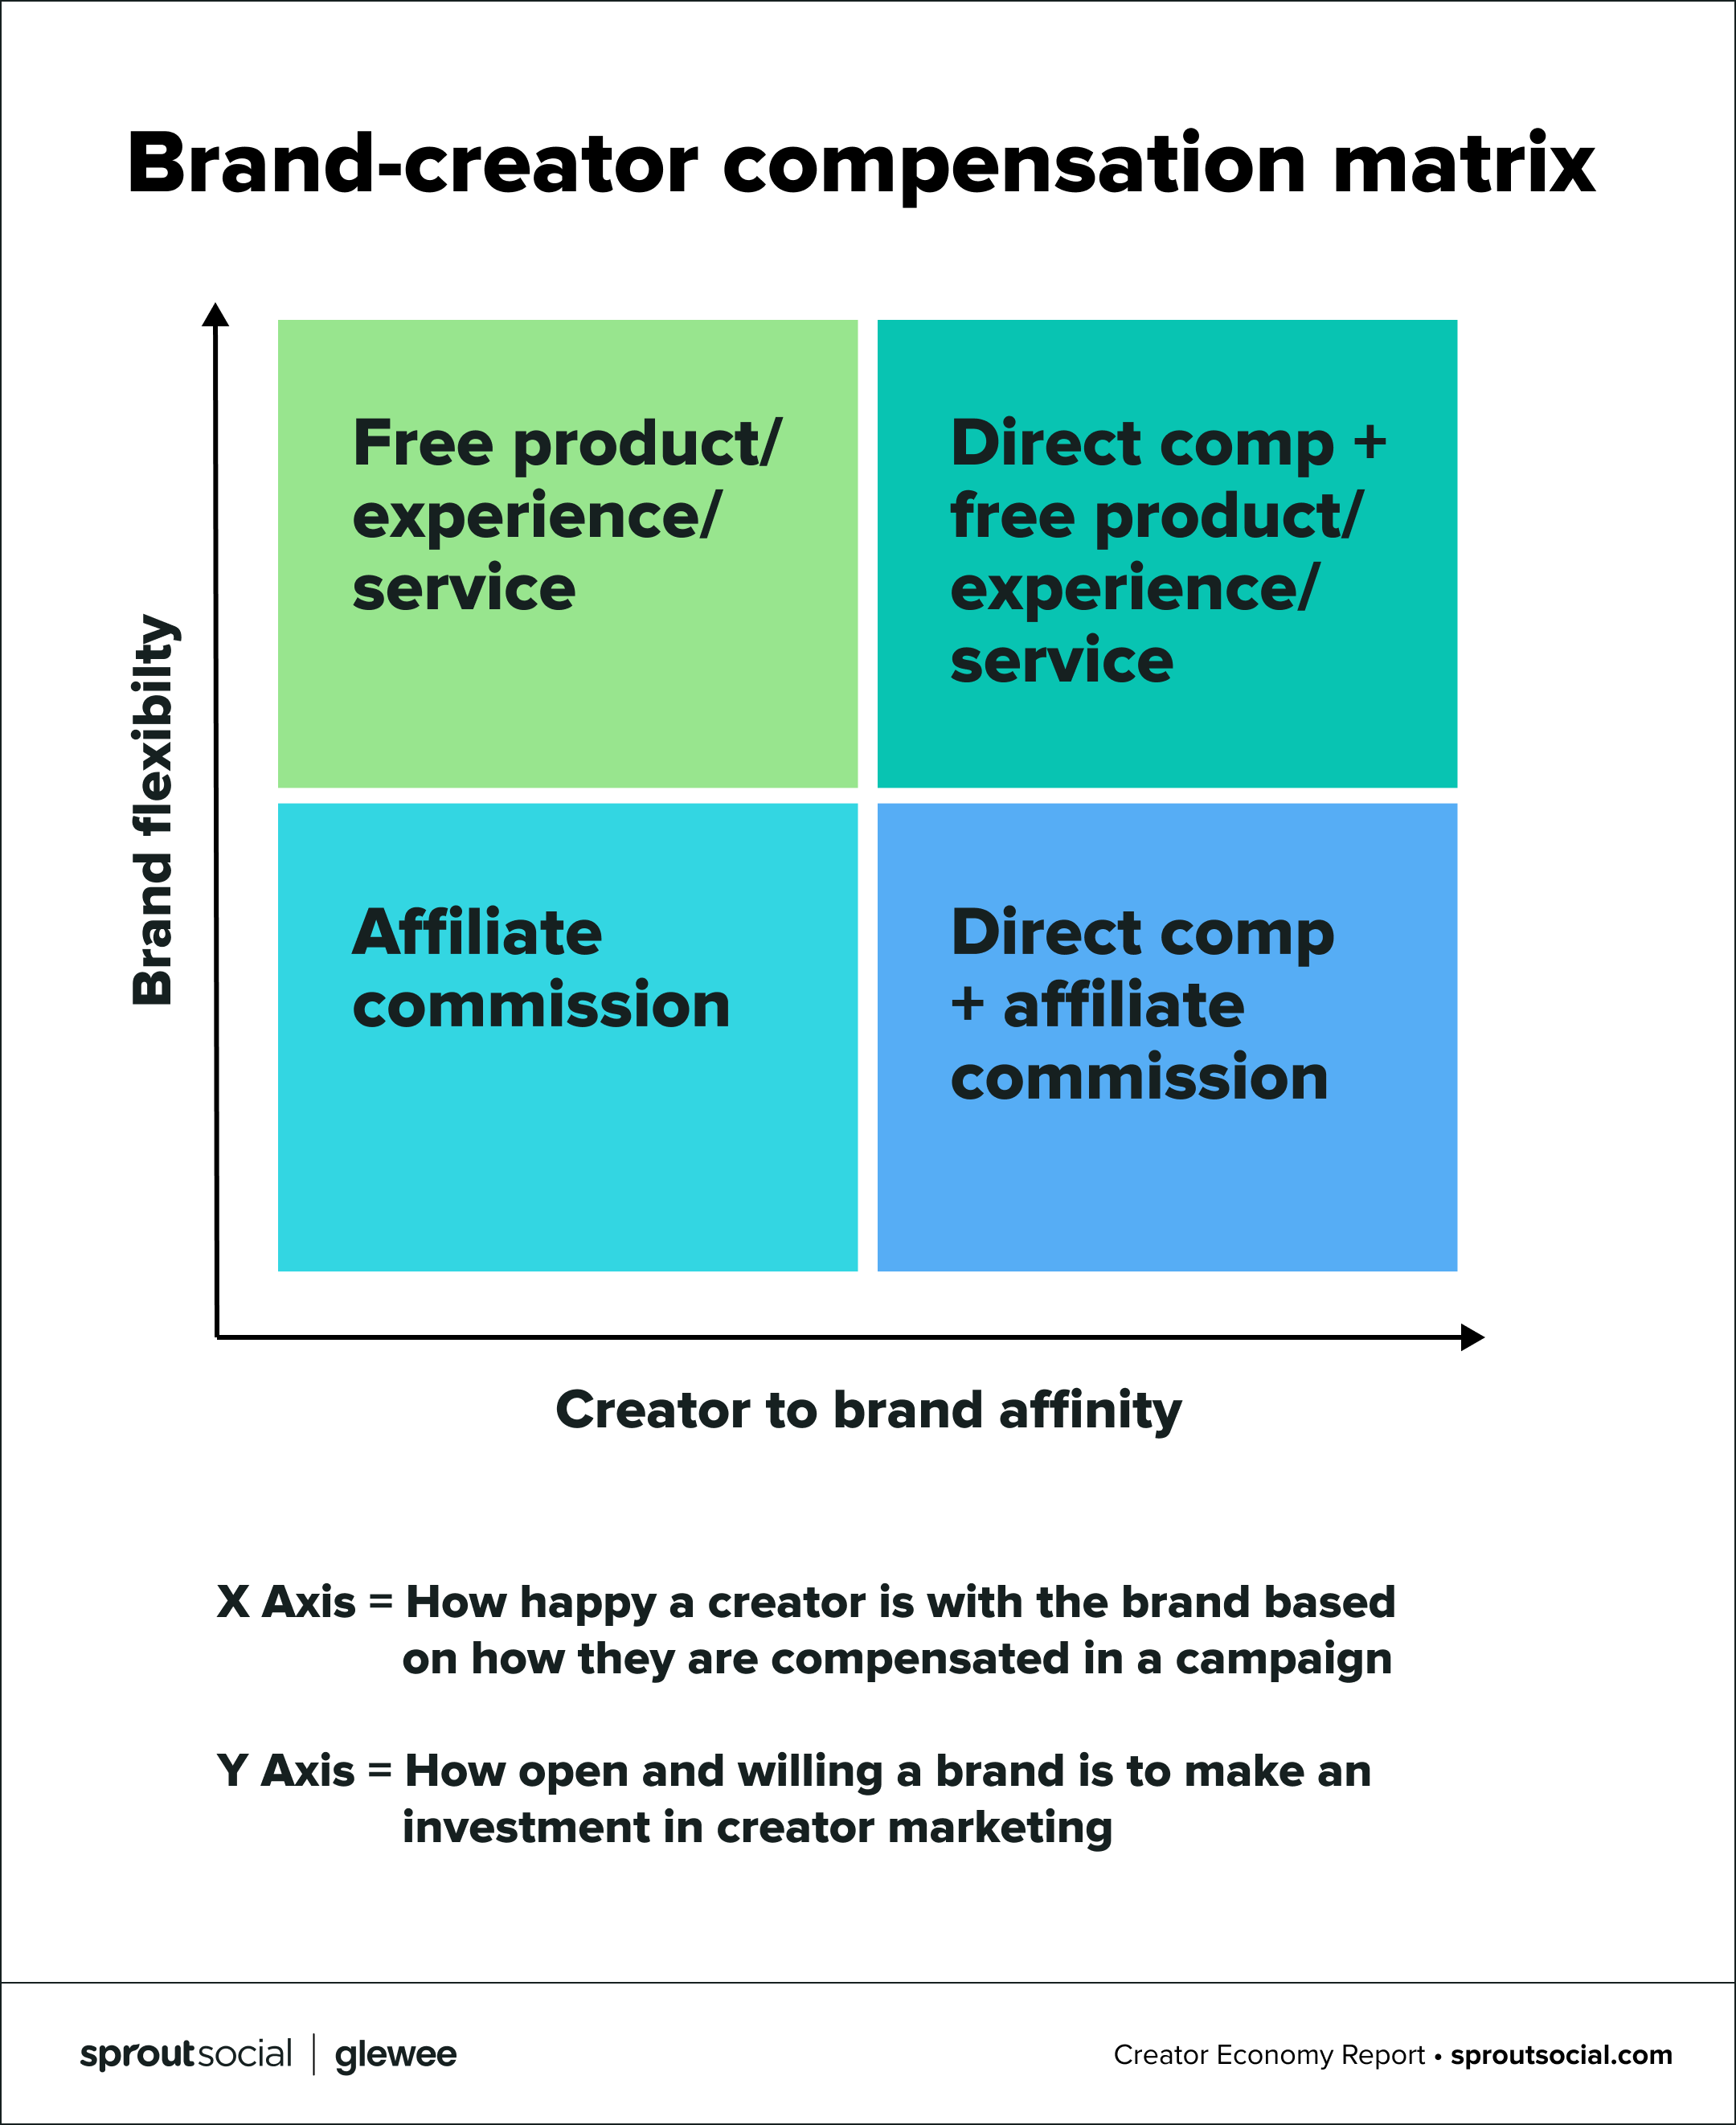 Graphic of a brand-creator compensation matrix, detailing four options for how brands can pay for creators' time and effort